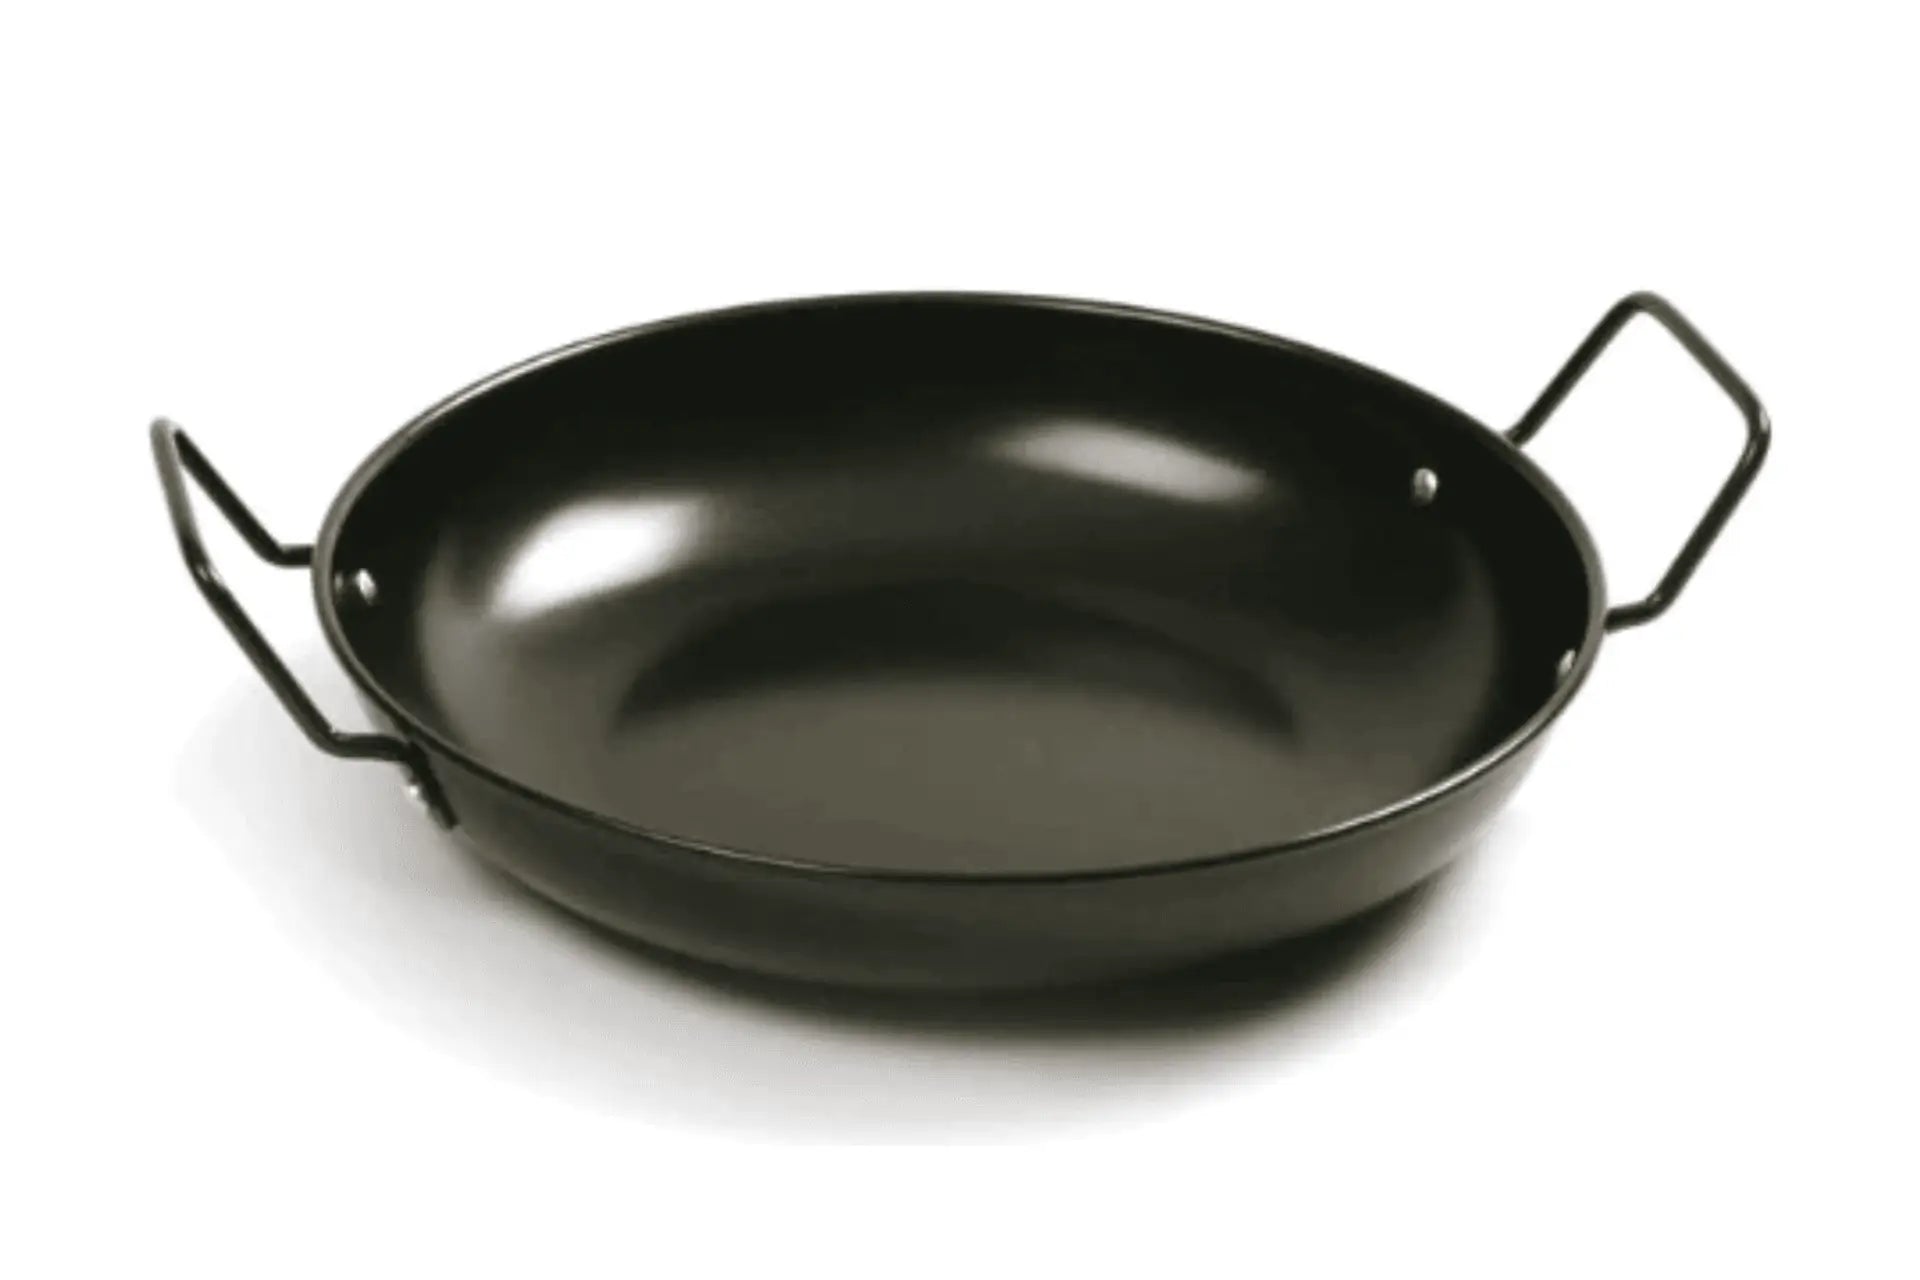 Norpro 14" Non-Stick Dutch Baby Pan, a paella pan with nonstick coating